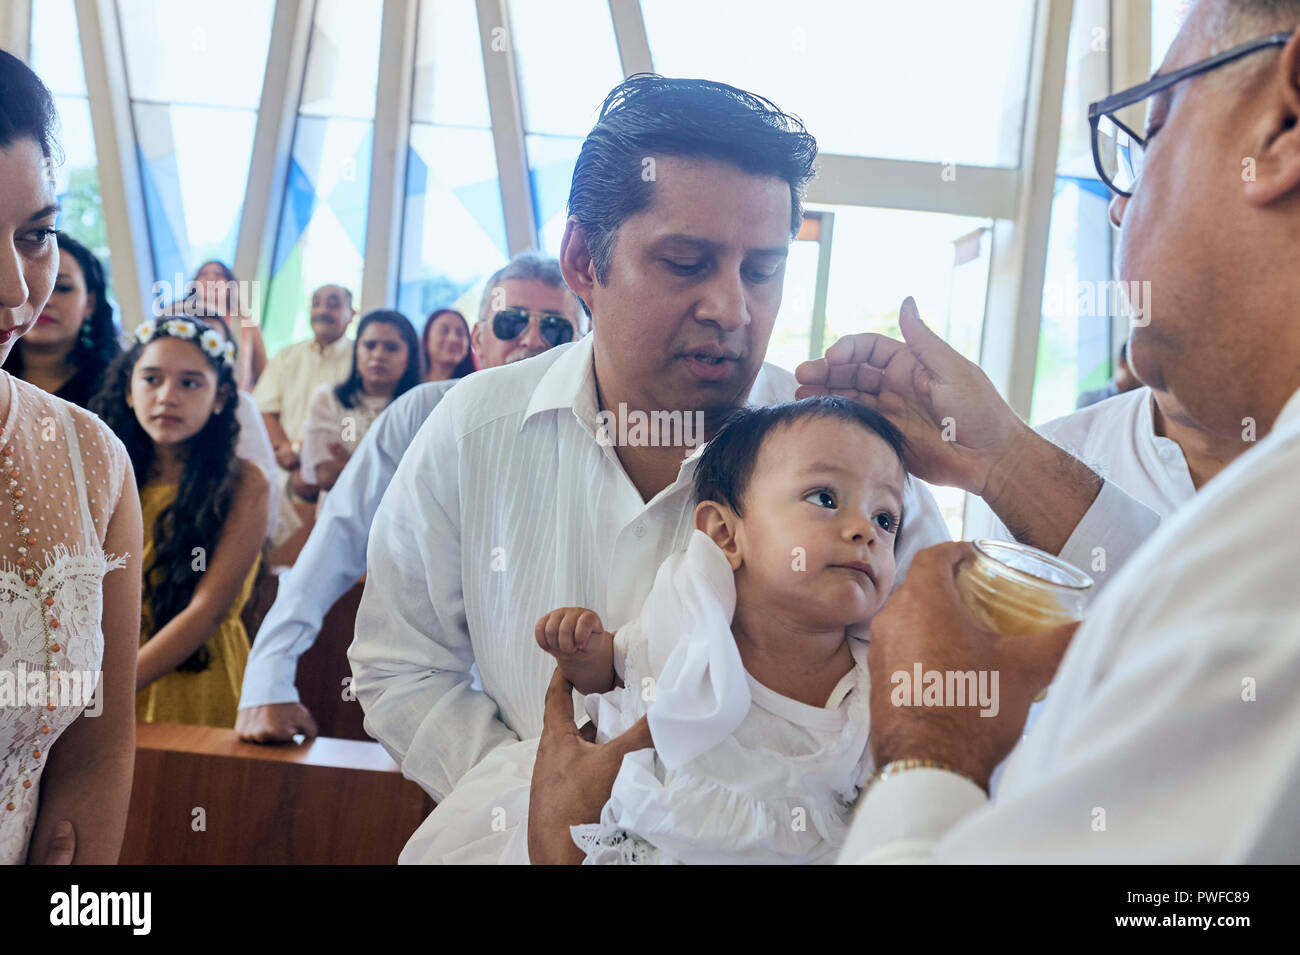 MERIDA, YUC/MEXICO - NOV 18, 2017: Godfather holds baby girl while catholic priest anoints her with chrism. Stock Photo